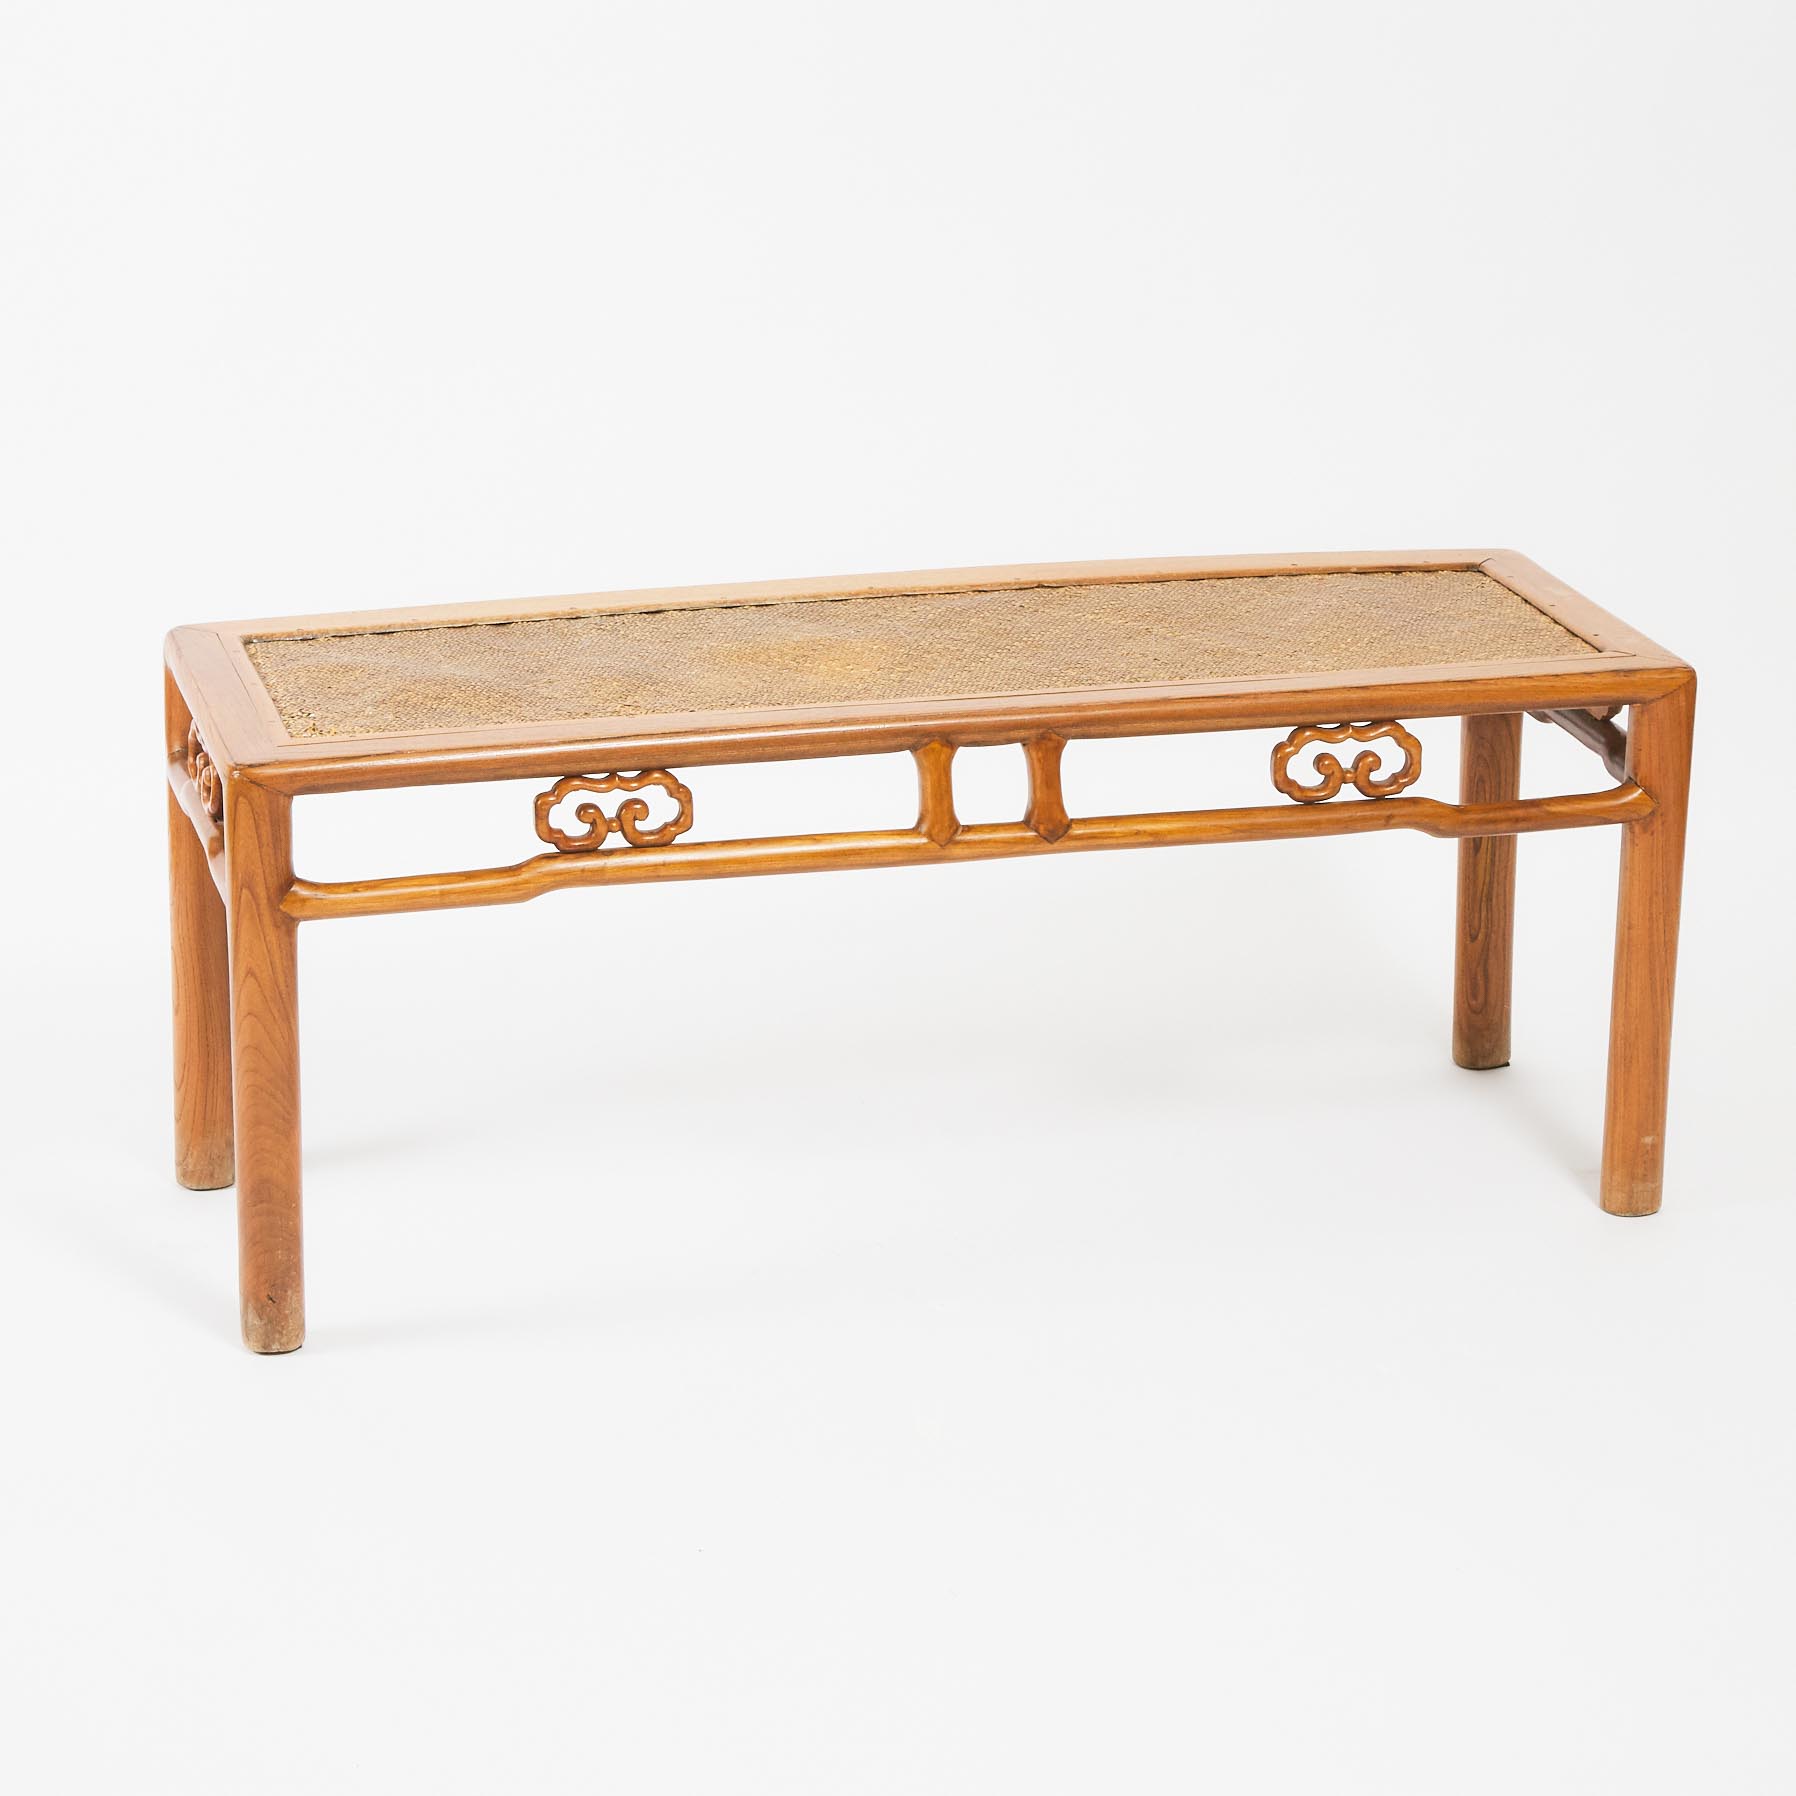 A Chinese Elmwood Bench Inset with Soft Mat Seat, 19th Century